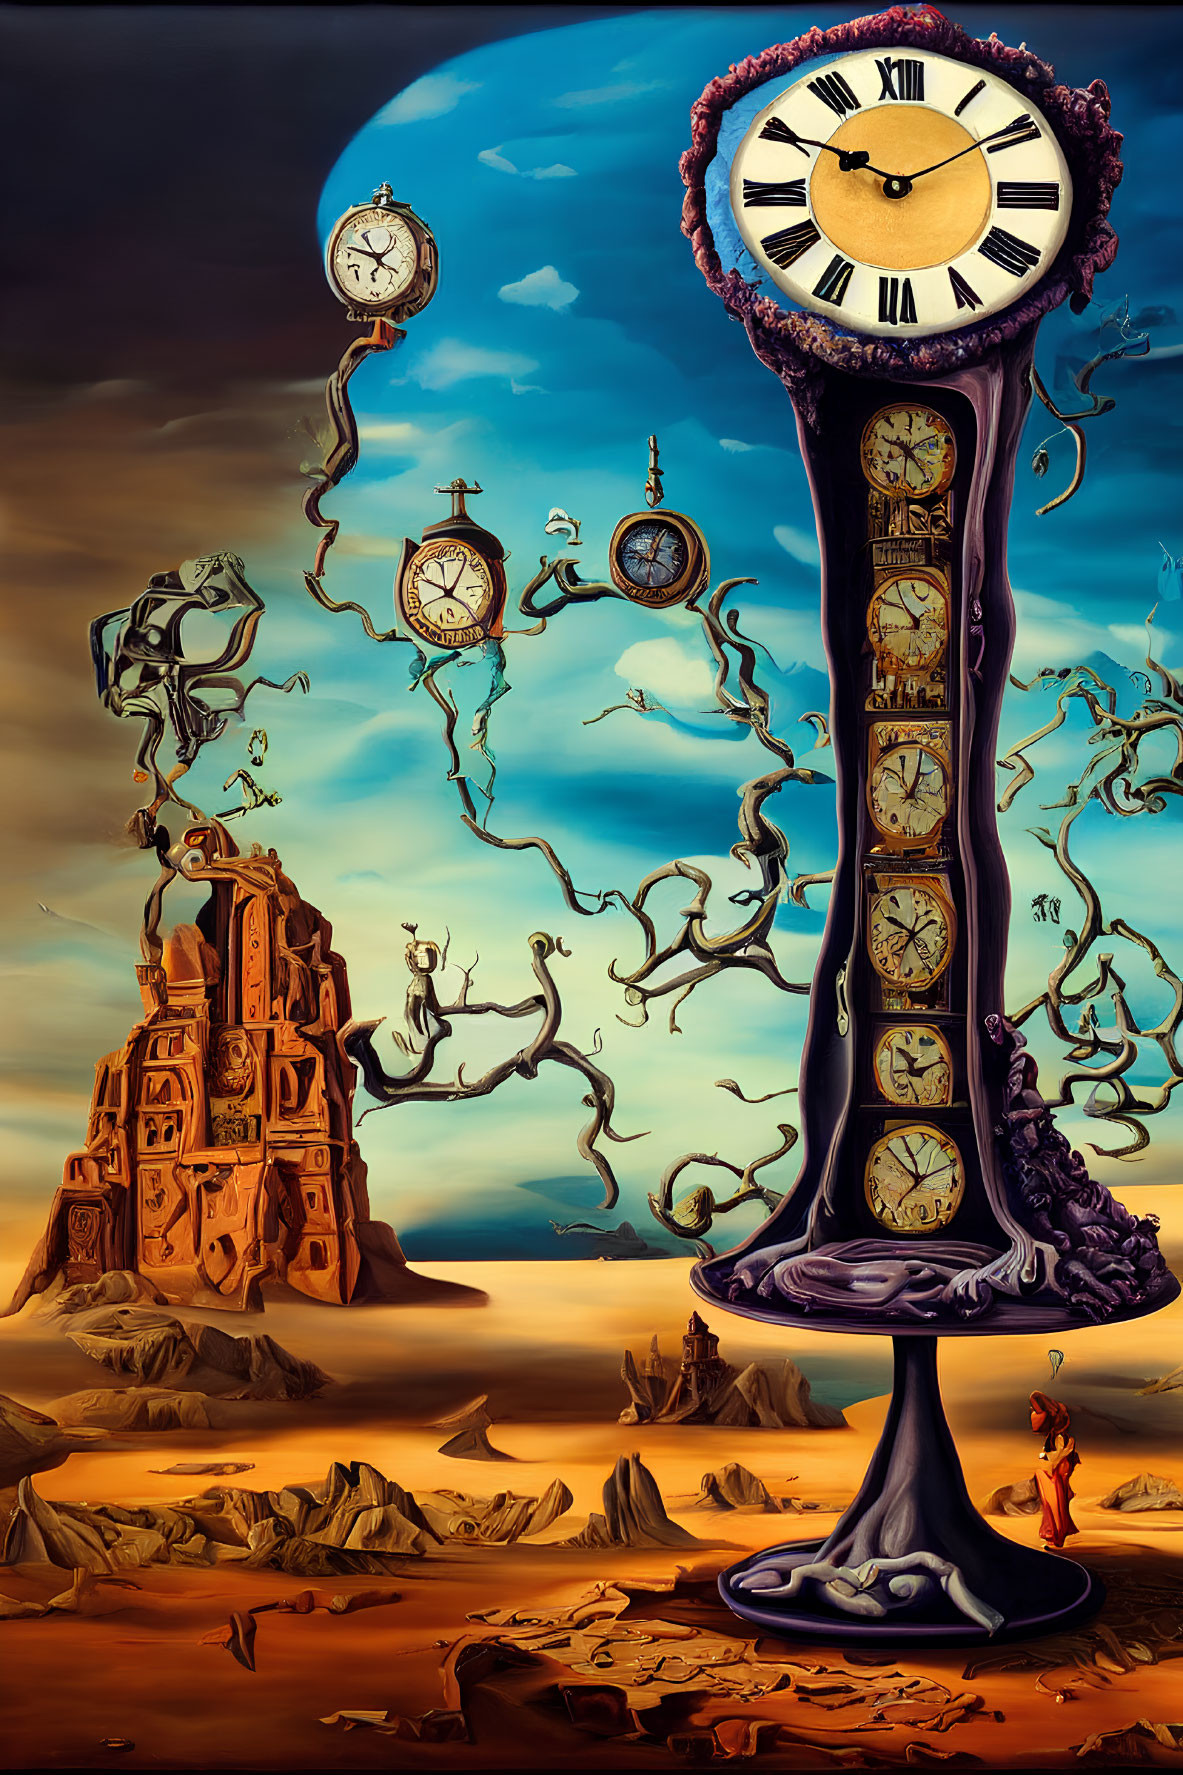 Surreal landscape with melting clocks and twisted branches.